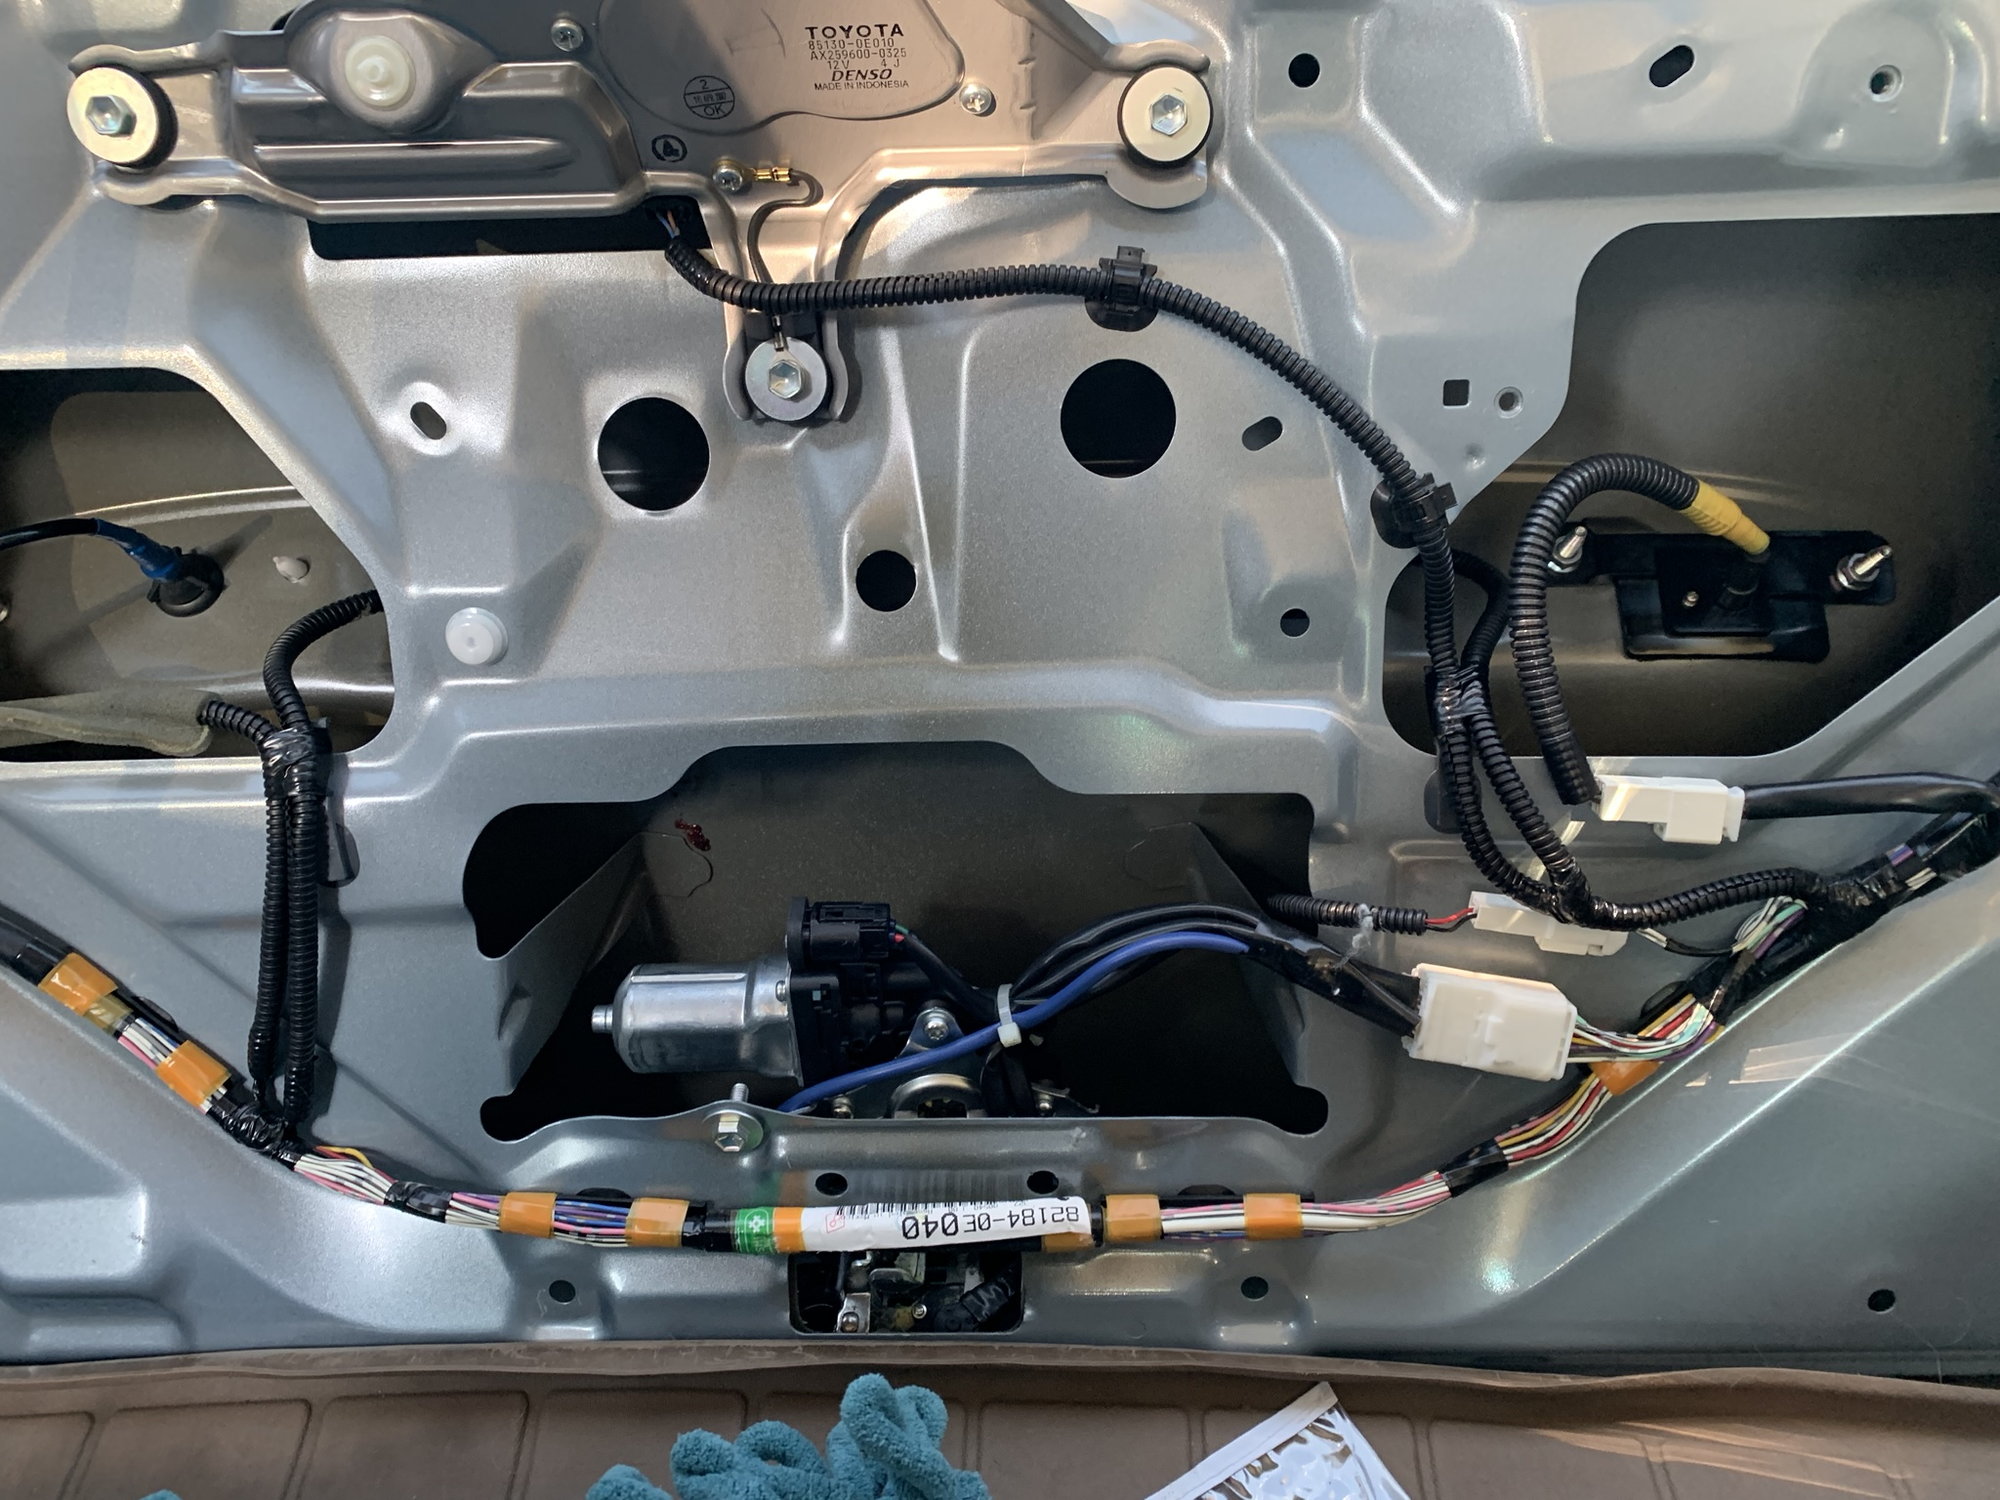 Cannot open rear hatch (liftgate) at all – jammed release mechanism